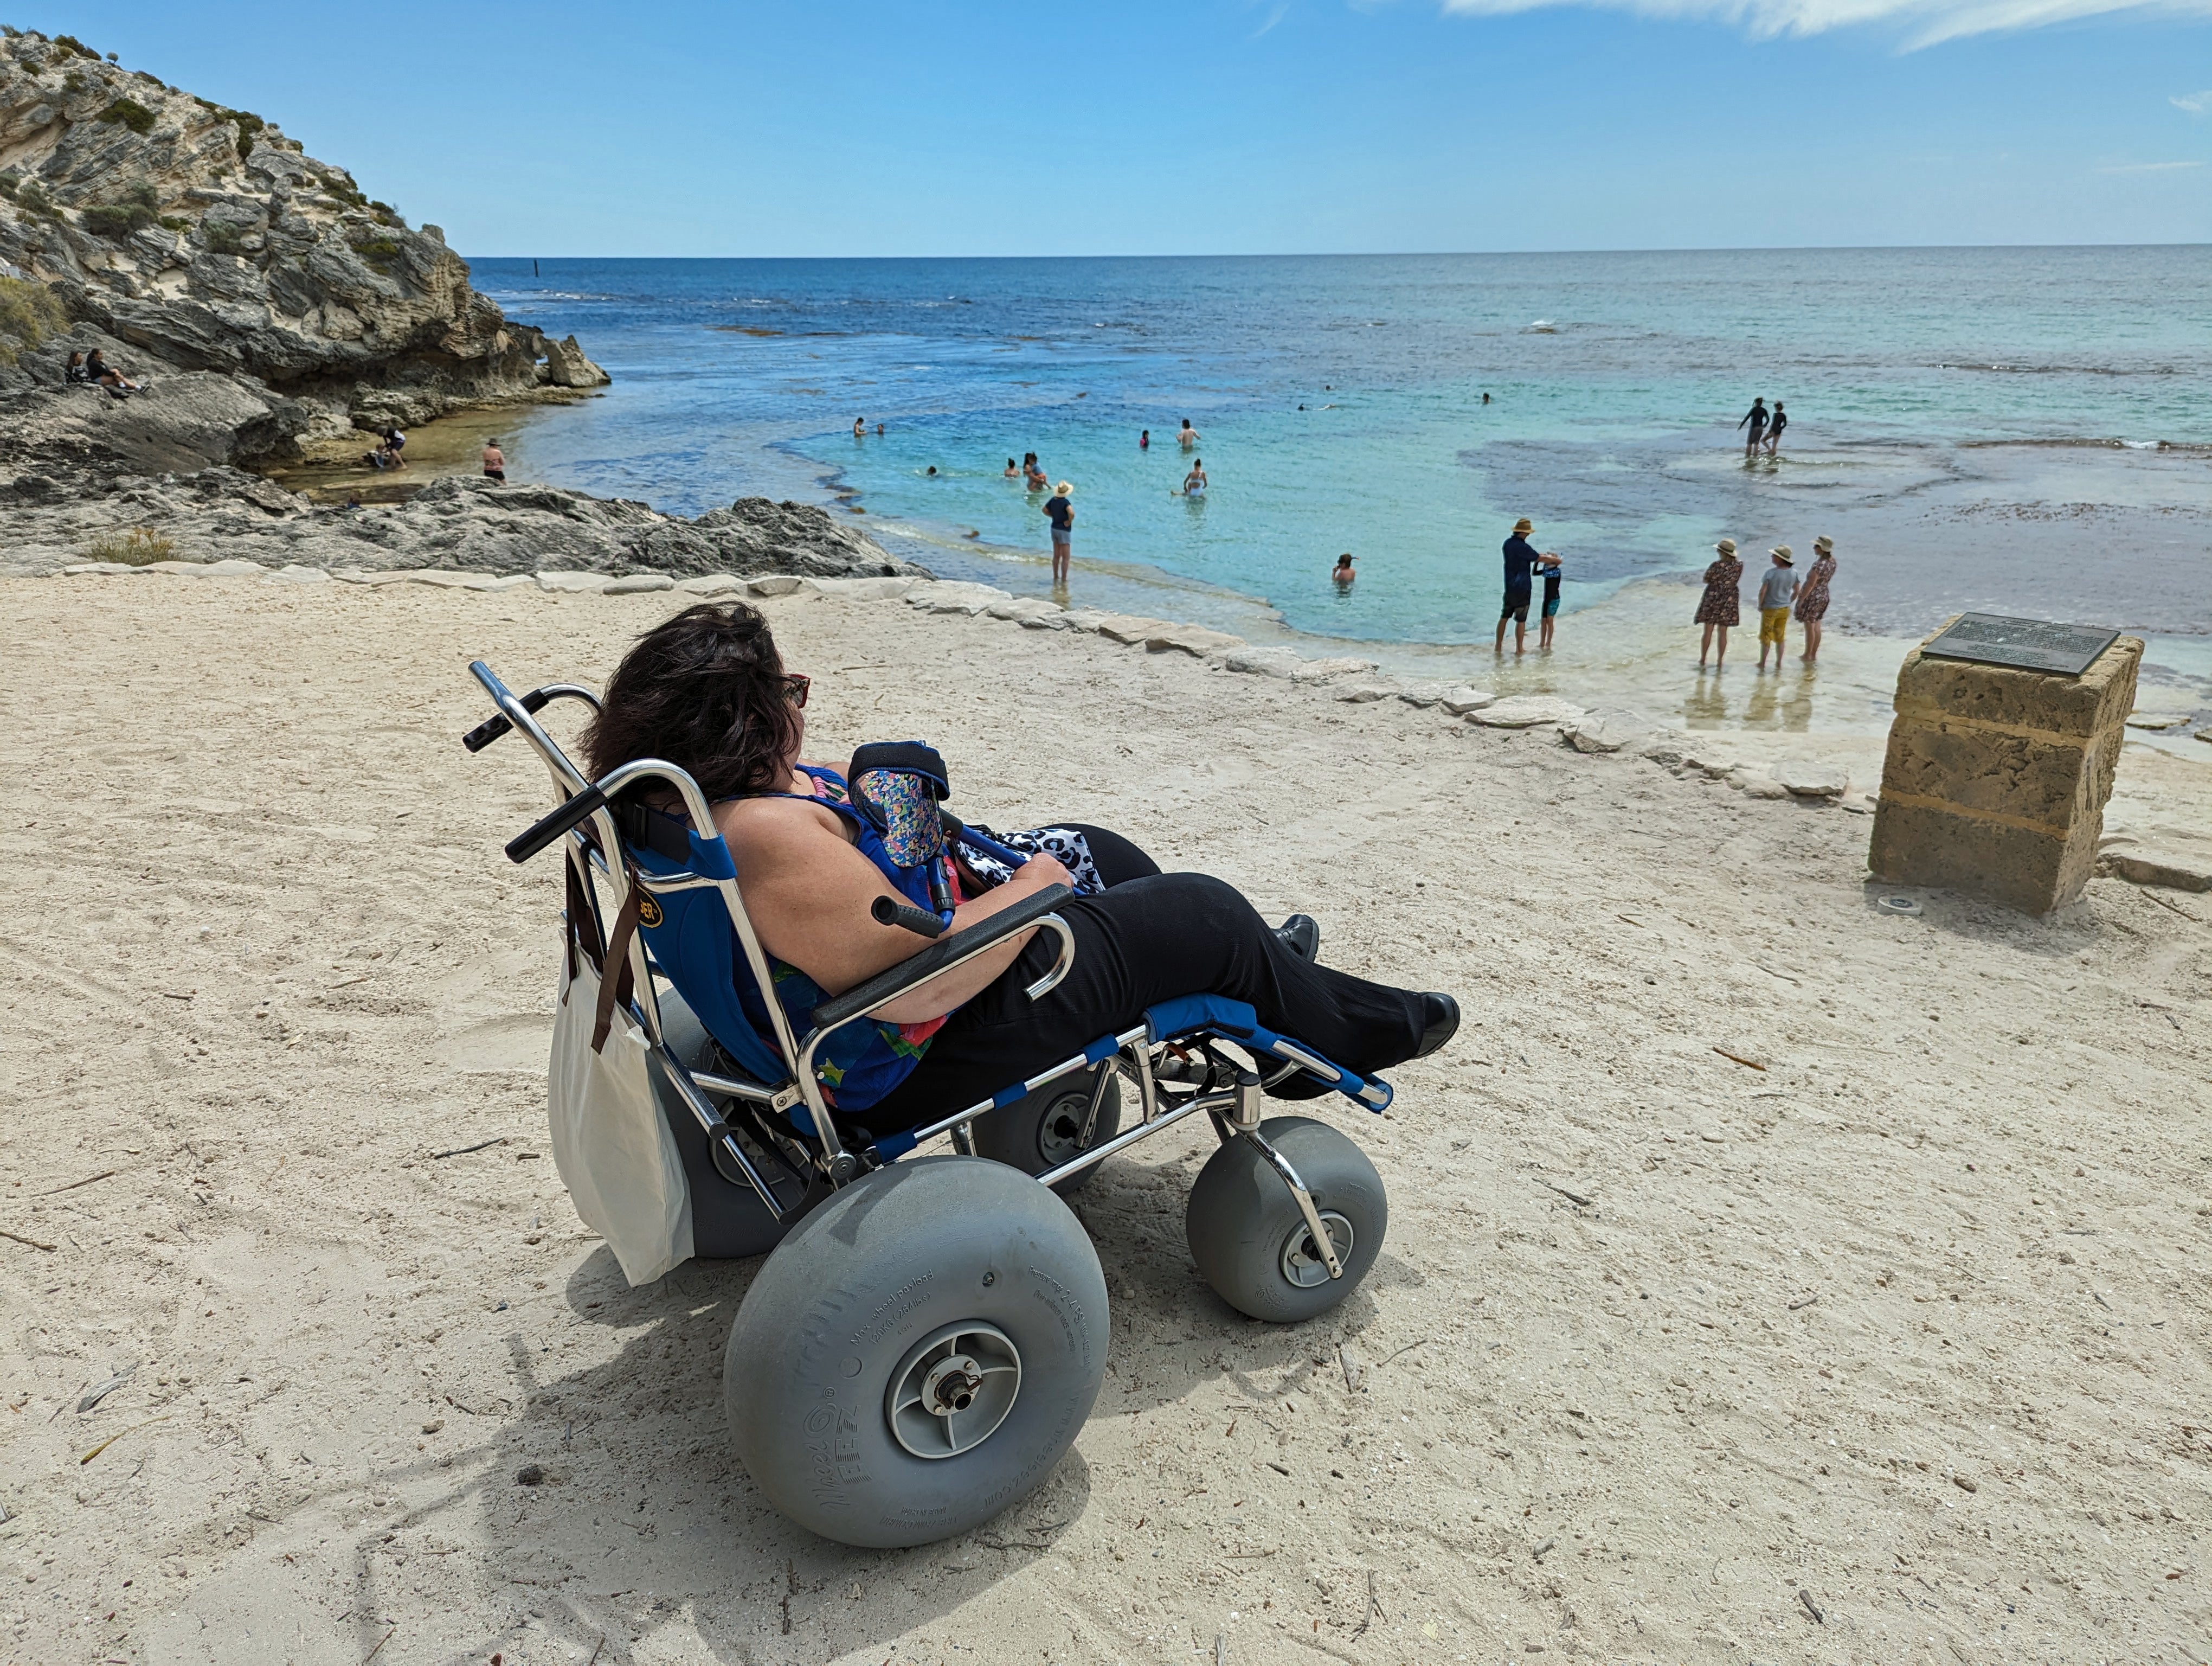 Basin Rottnest Island has made great strides in becoming more accessible